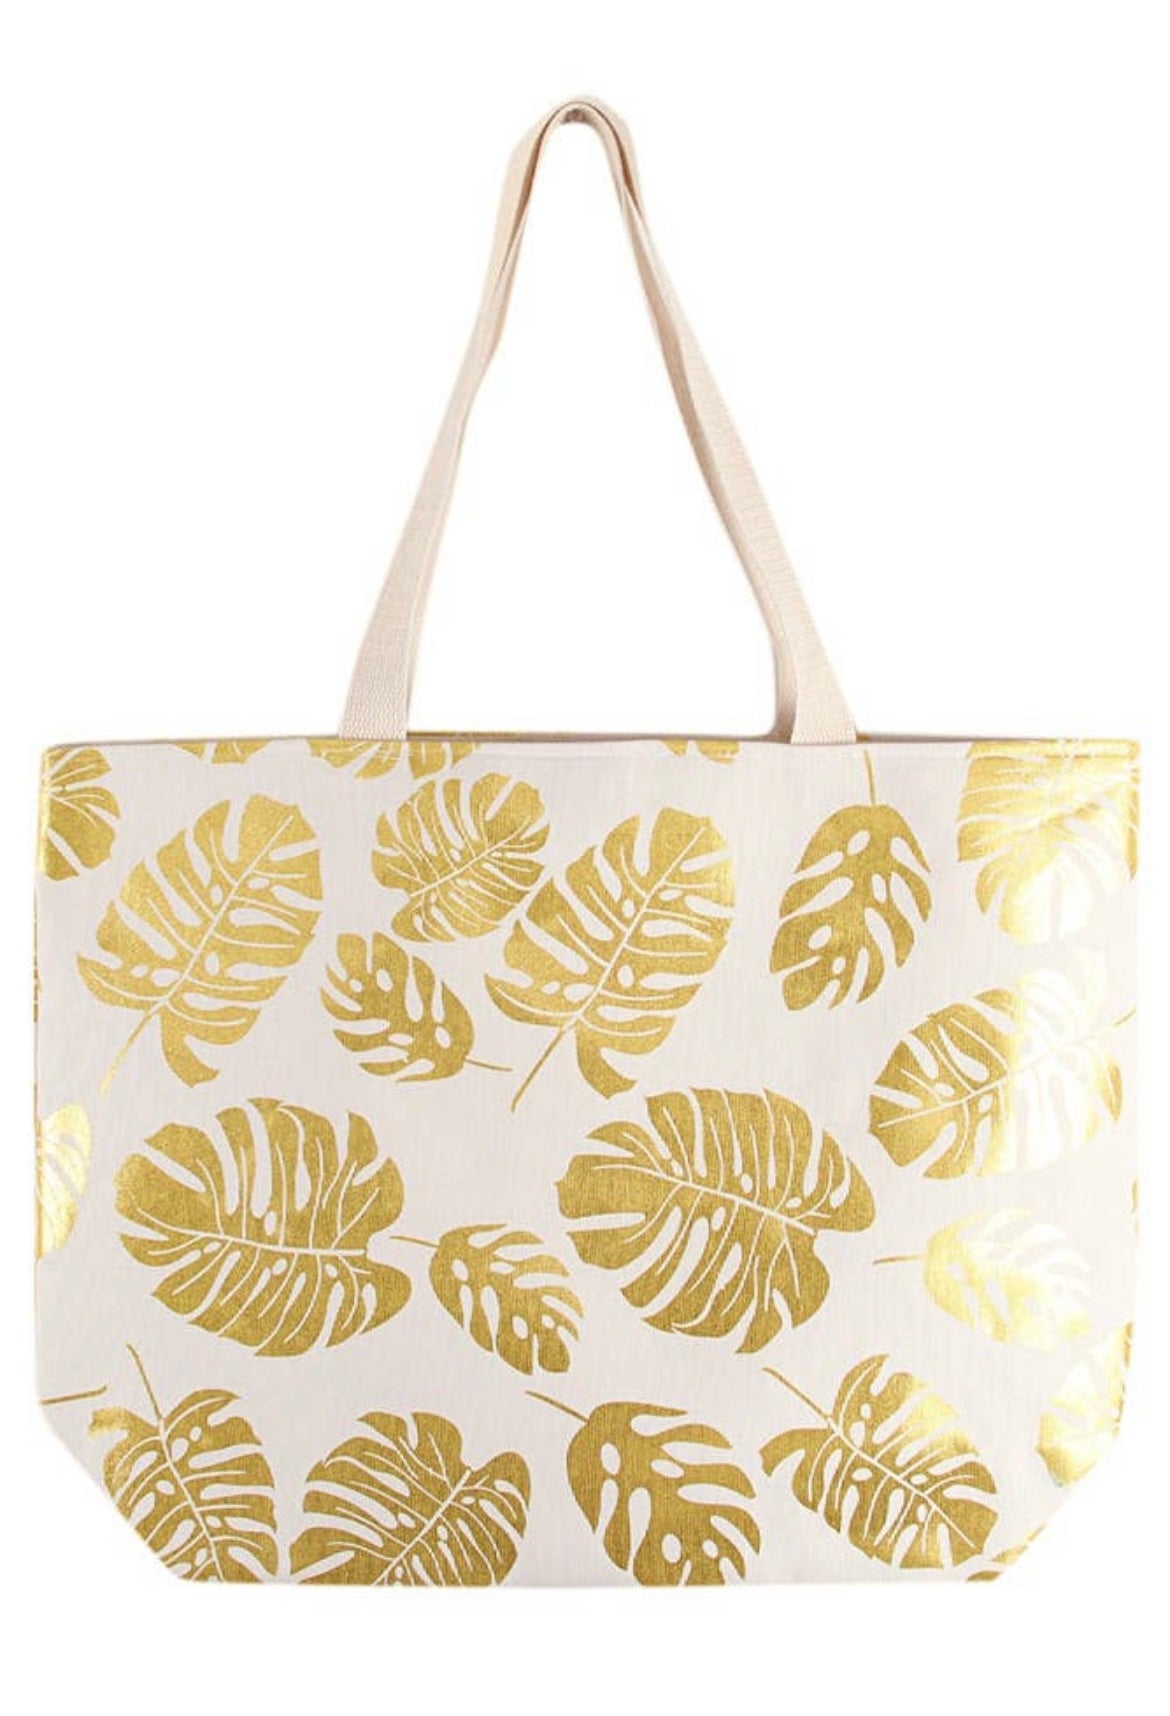 Cream beach bag with gold foil tropical leaves imprinted  throughout.  Bag has a snap closure and long straps. 